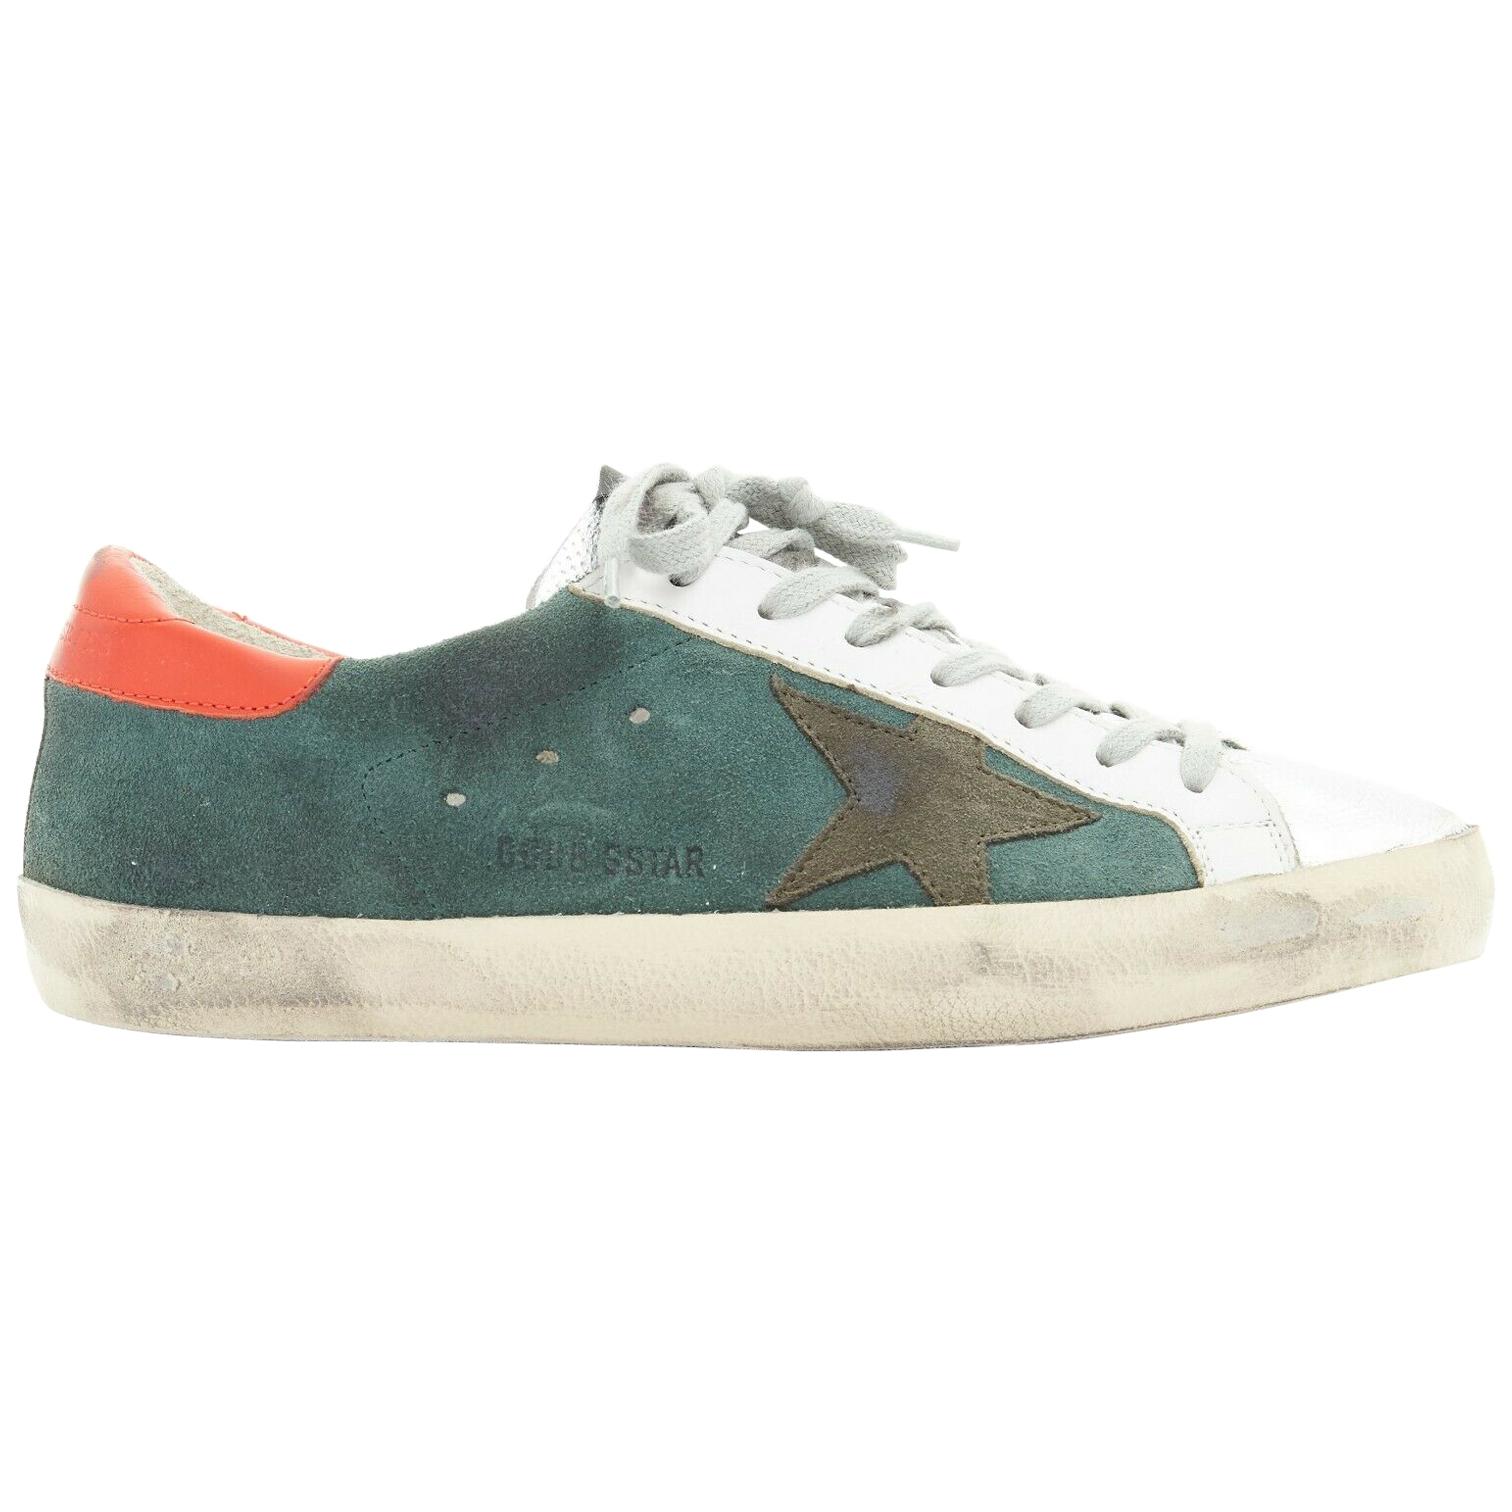 new GOLDEN GOOSE green suede silver toe distressed dirty lace up sneaker EU41